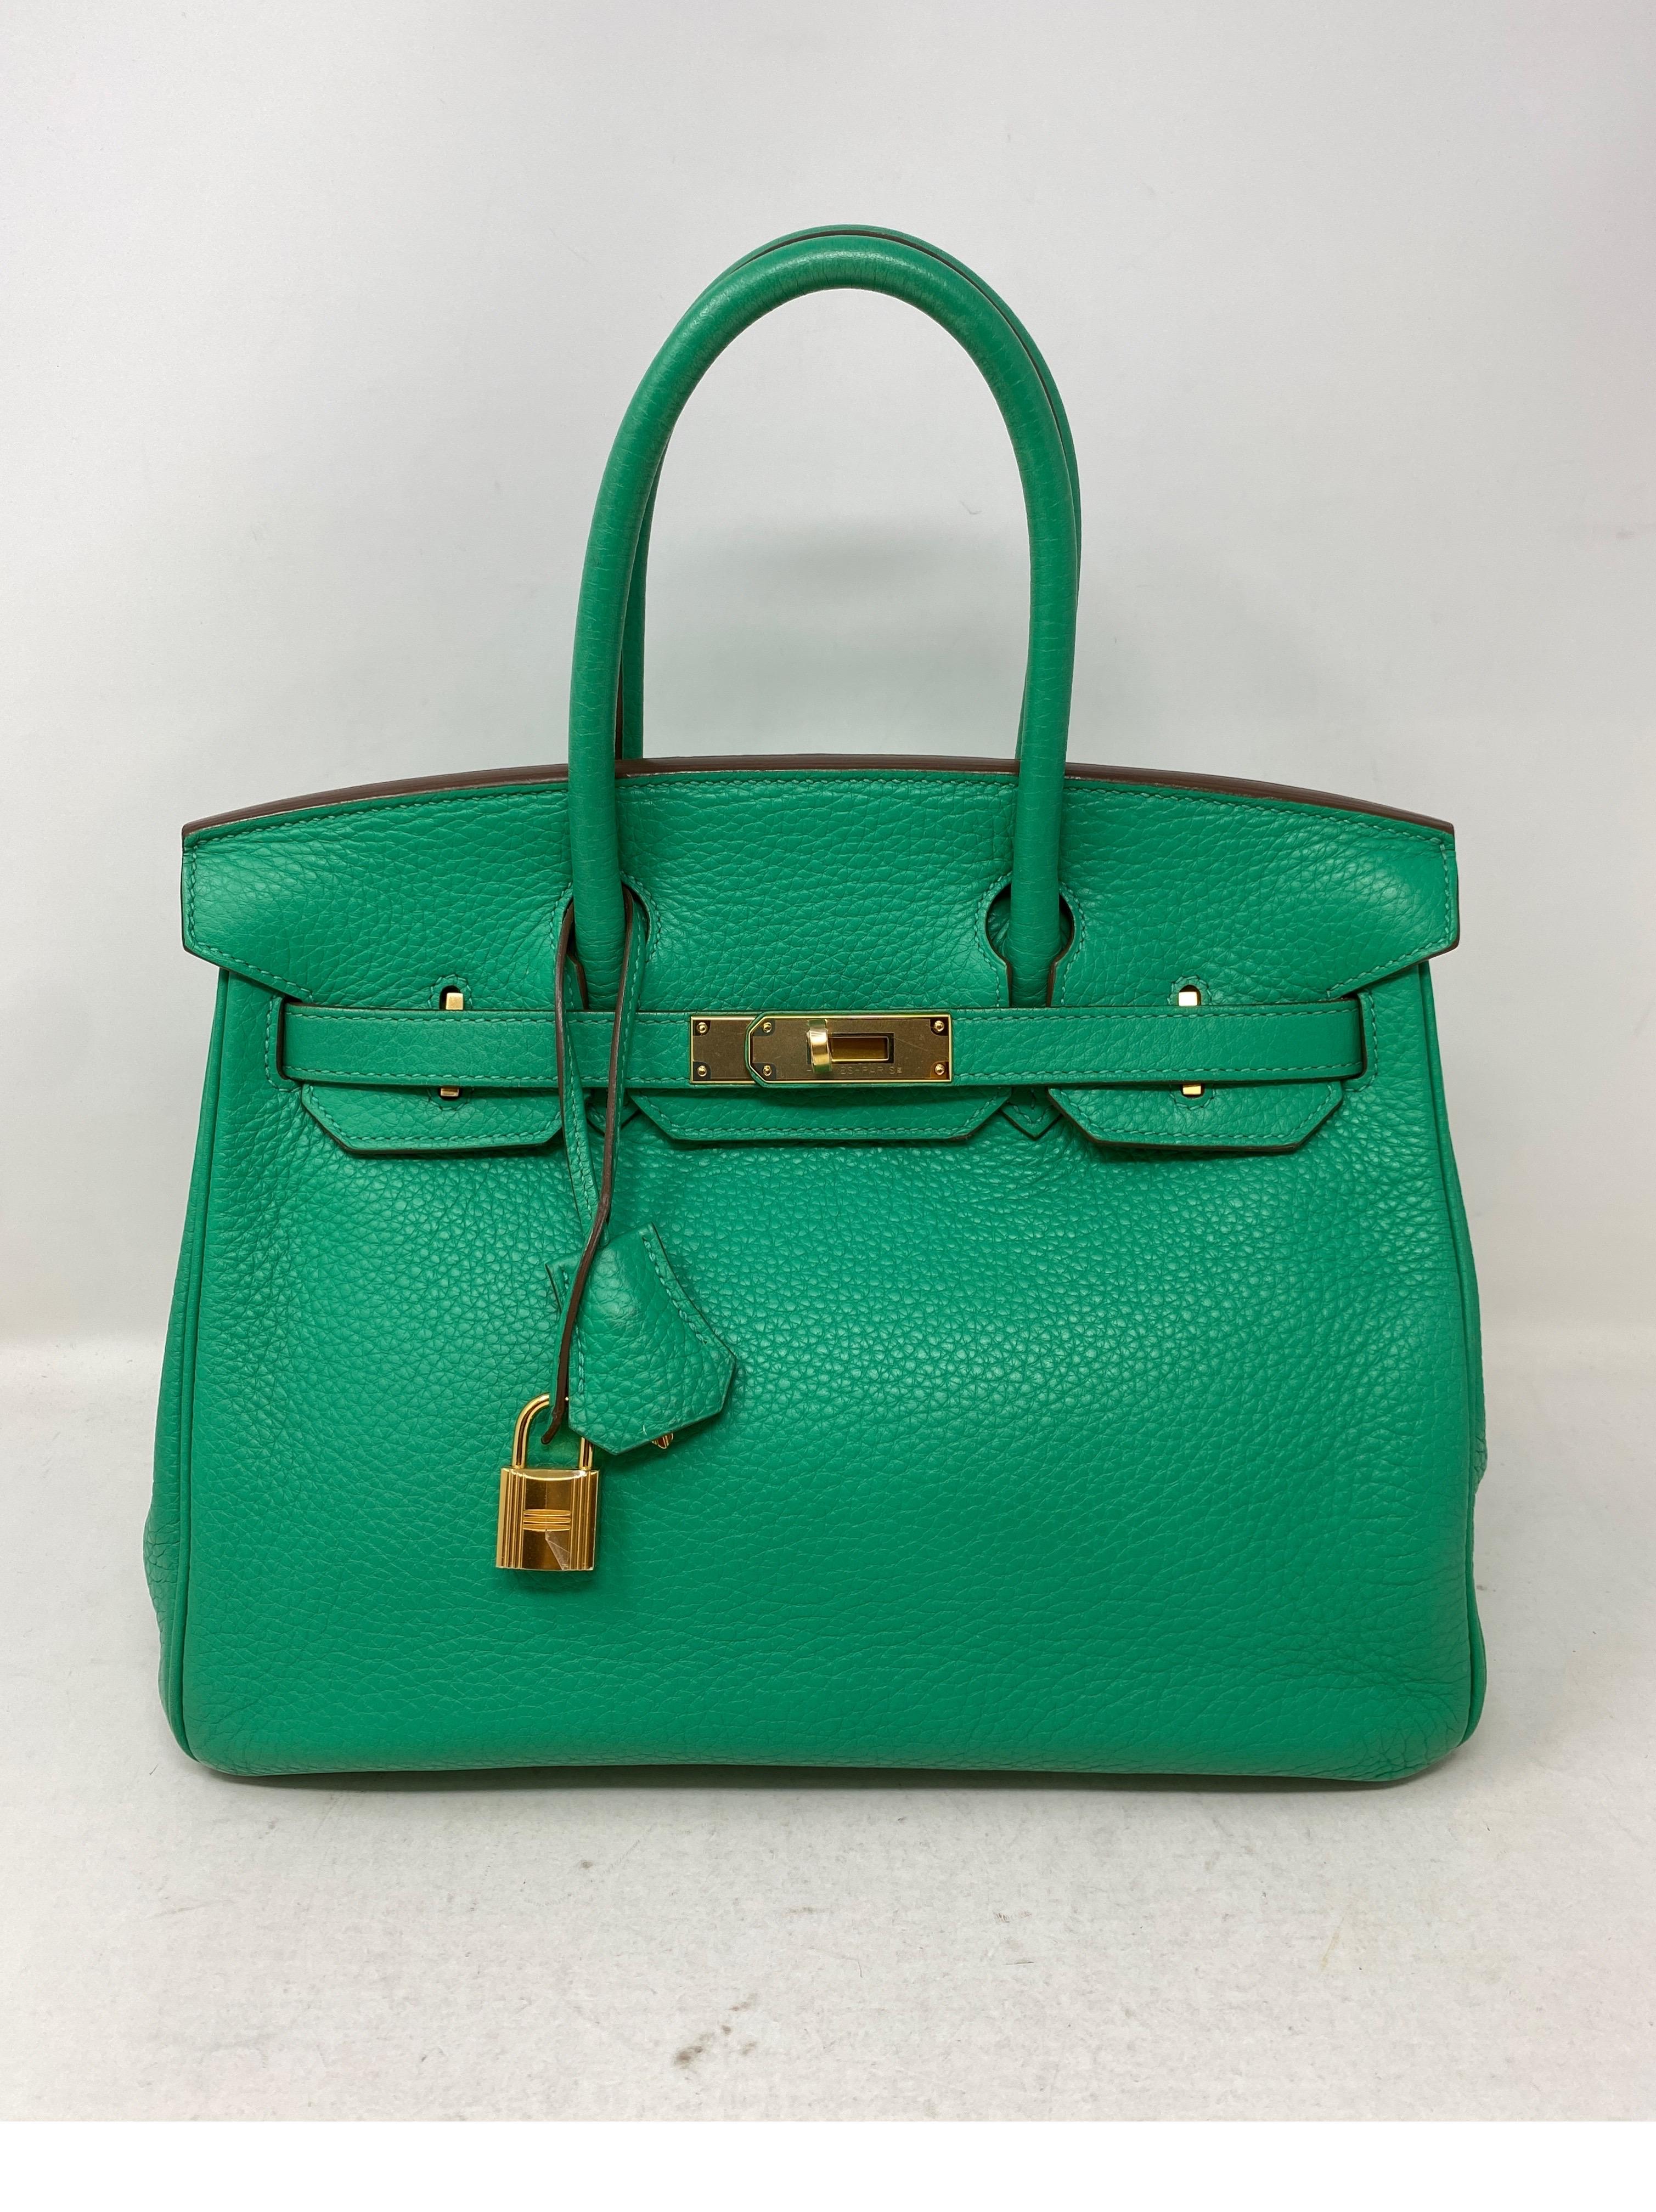 Hermes Birkin 30 Menthe Bag. Gold hardware. Clemence leather. Minty green fresh color. Excellent condition. Includes clochette, lock, keys, and dust cover. Guaranteed authentic. 